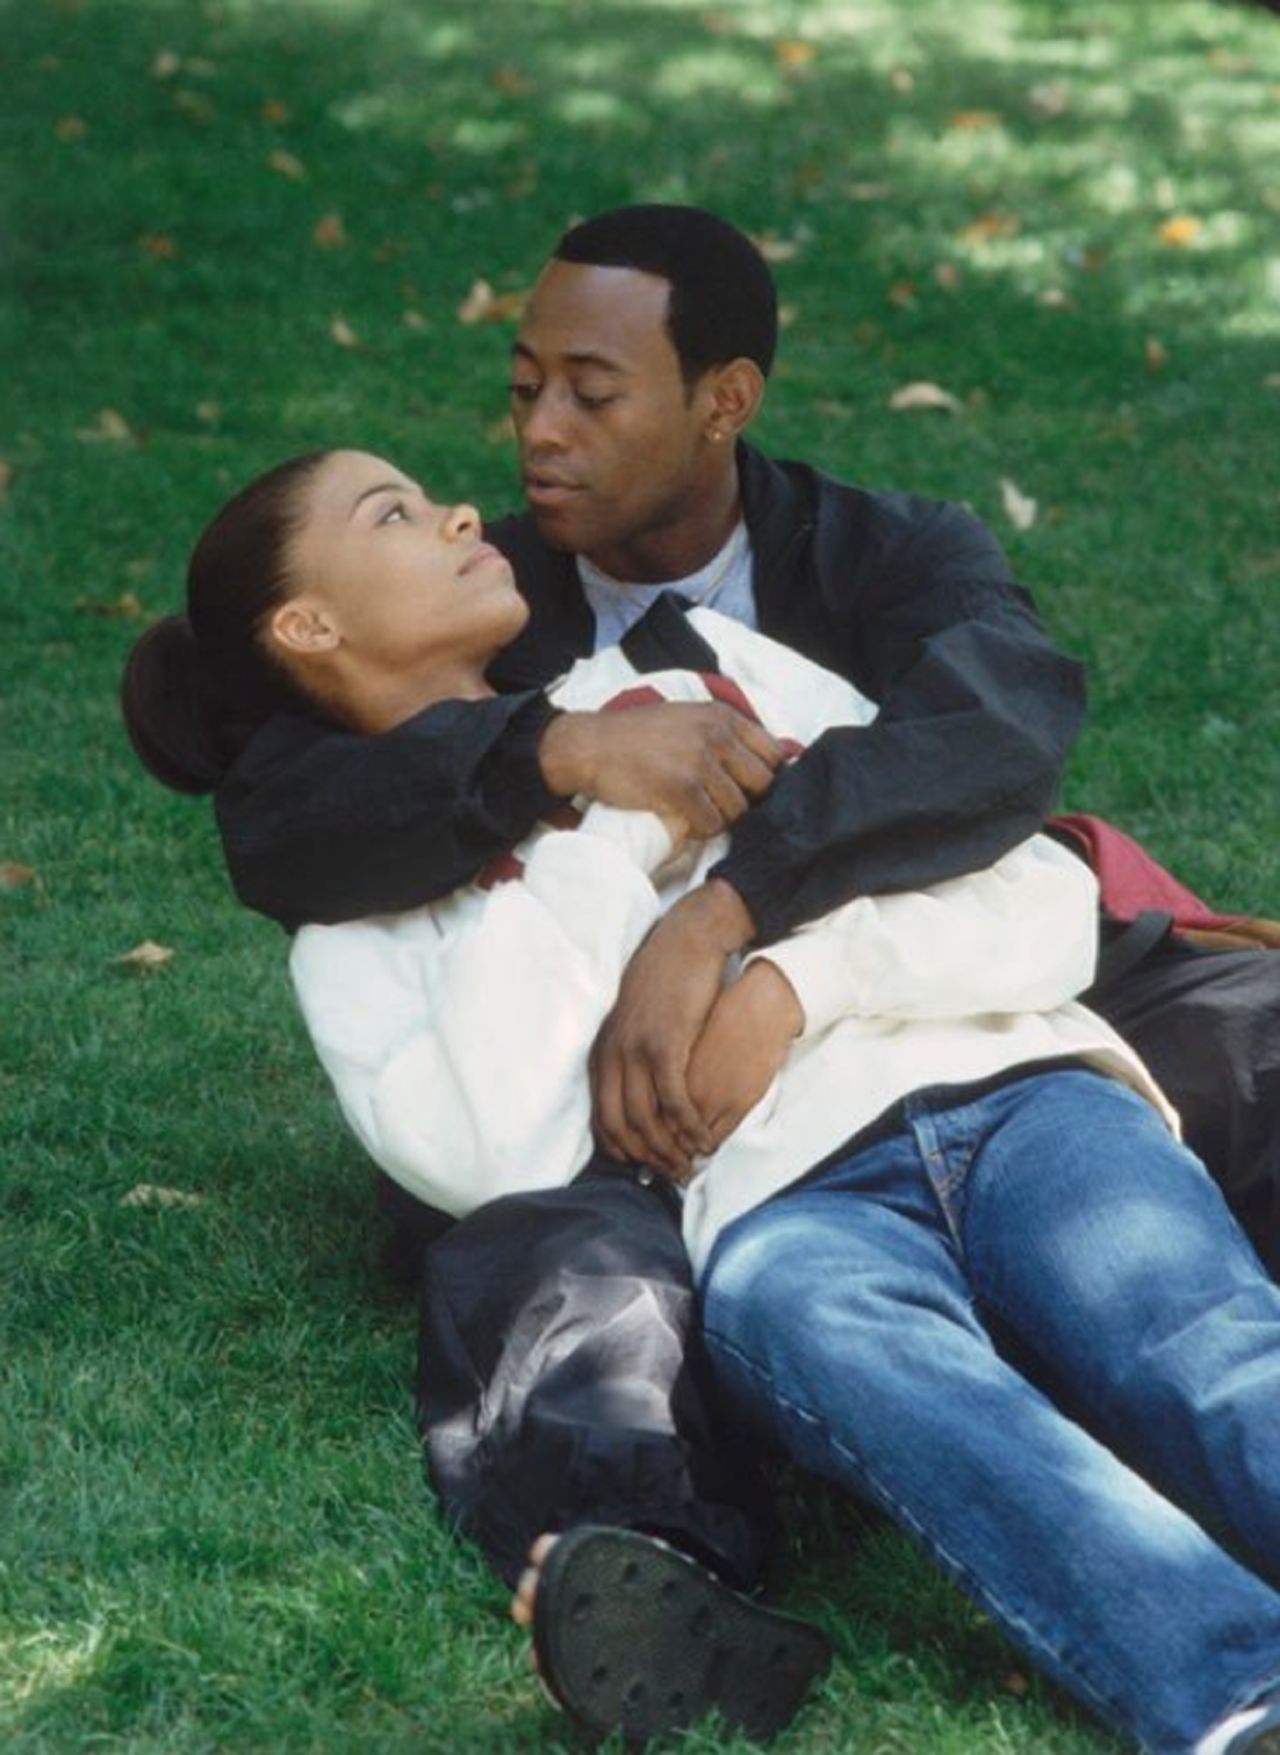 Released in 2000, the film -- starring Sanaa Lathan and Omar Epps -- centers around the friendship-turned-relationship of two neighbors who share a passion for playing basketball and going pro. However, the demands of competitive sports cause a strain between them. IMDb rates the movie at 7.2 stars. It can be streamed on HBO Now.